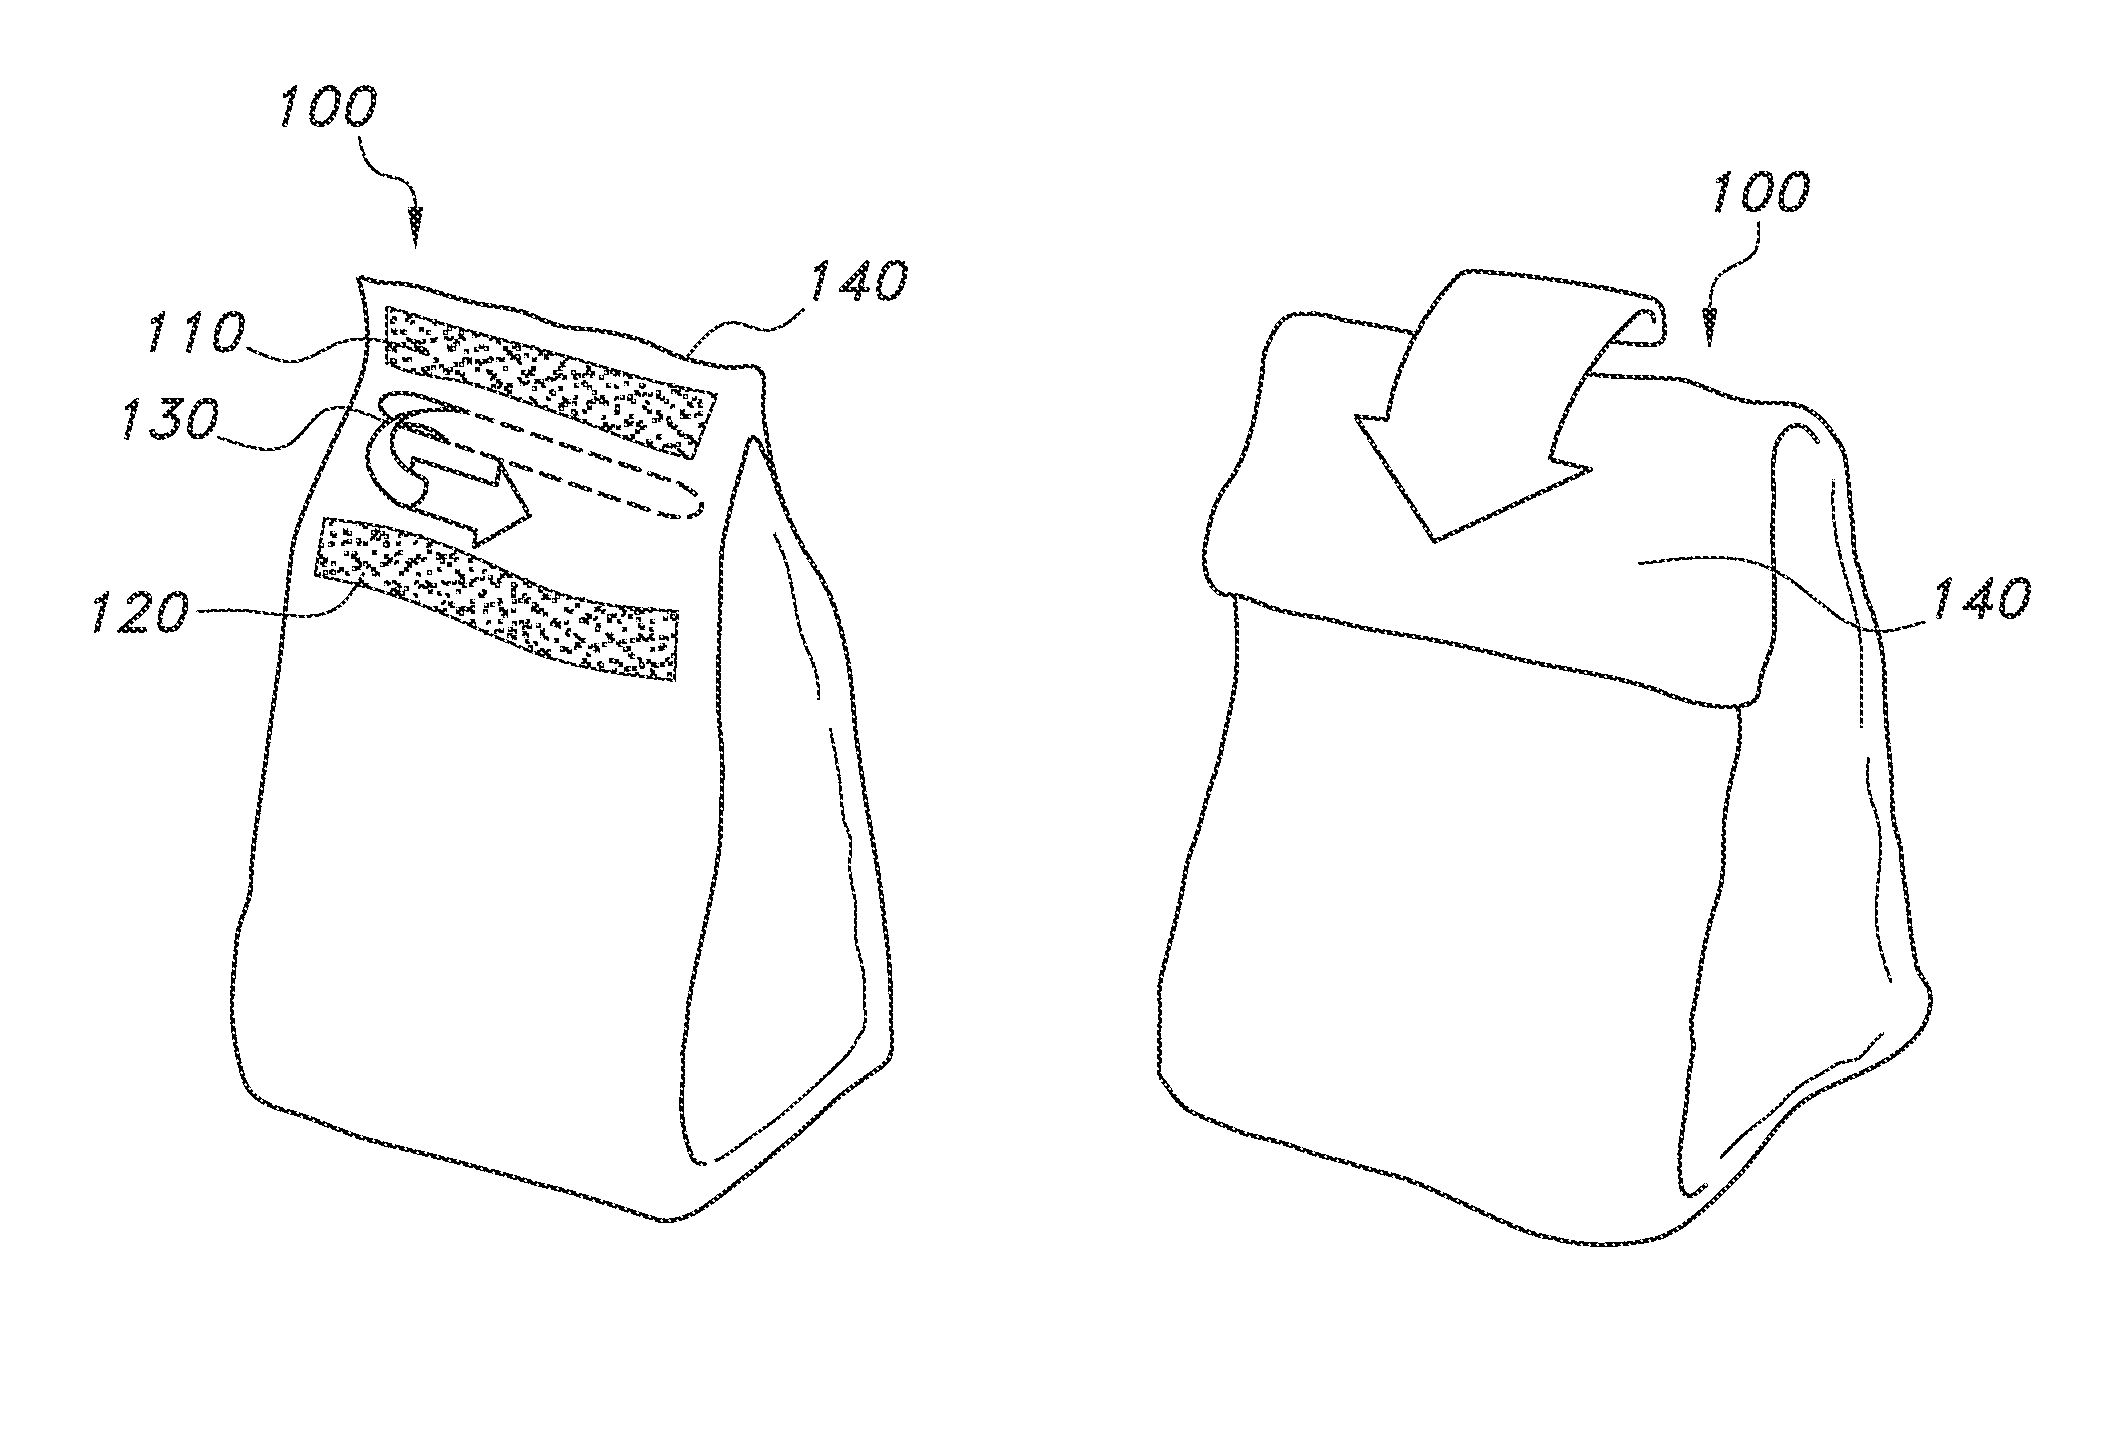 Resealable packaging articles and methods of making and using thereof